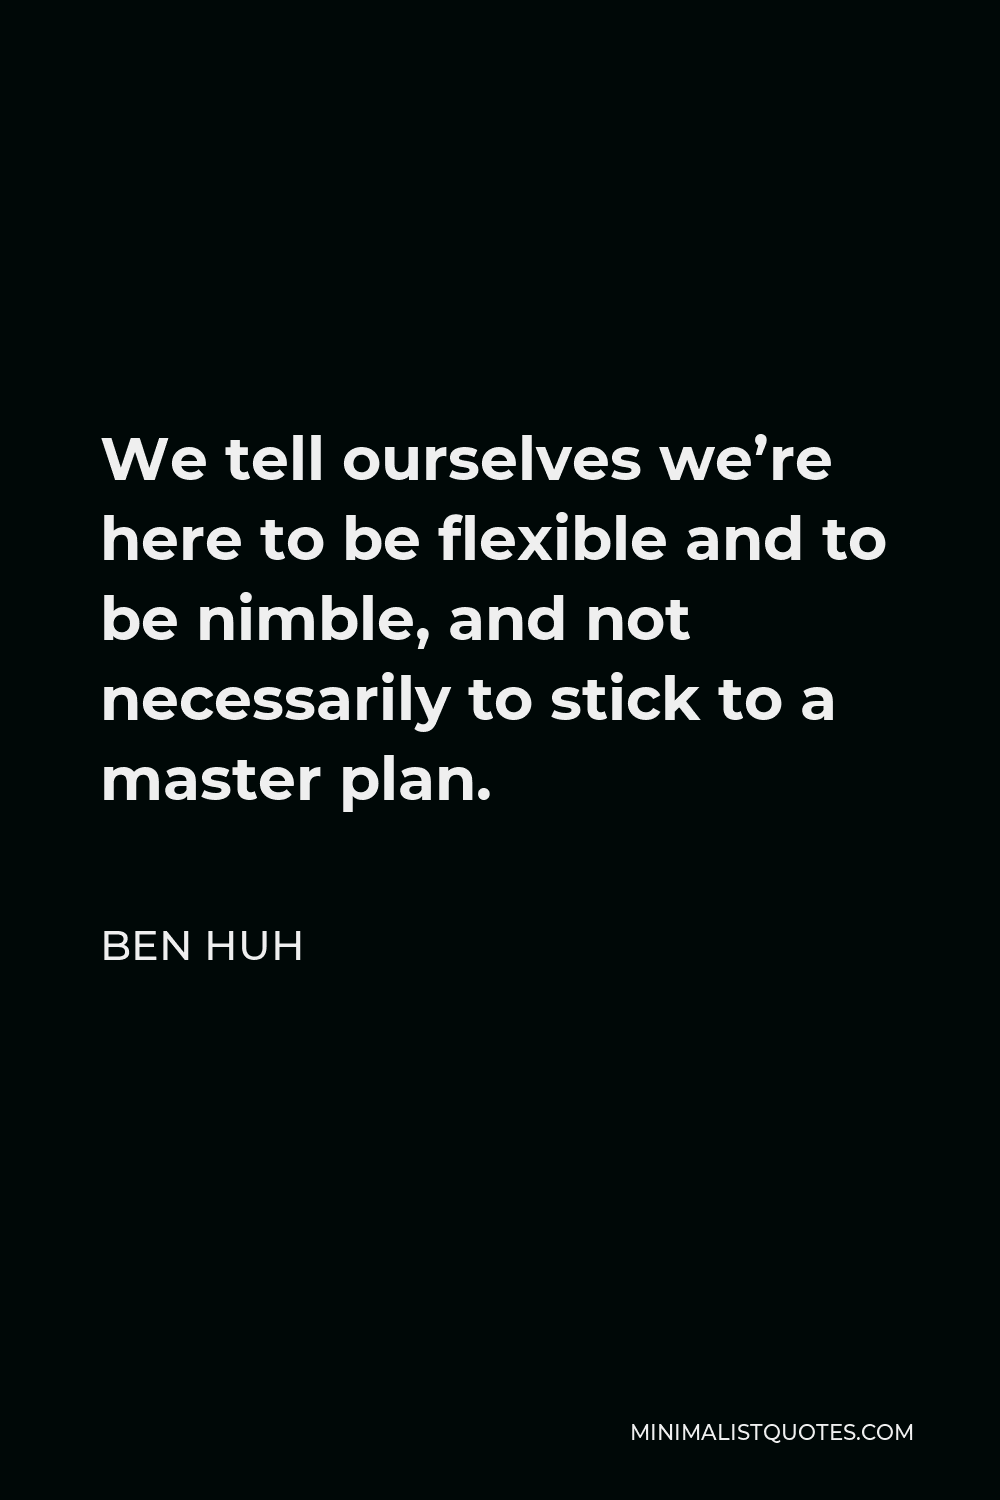 Ben Huh Quote - We tell ourselves we’re here to be flexible and to be nimble, and not necessarily to stick to a master plan.